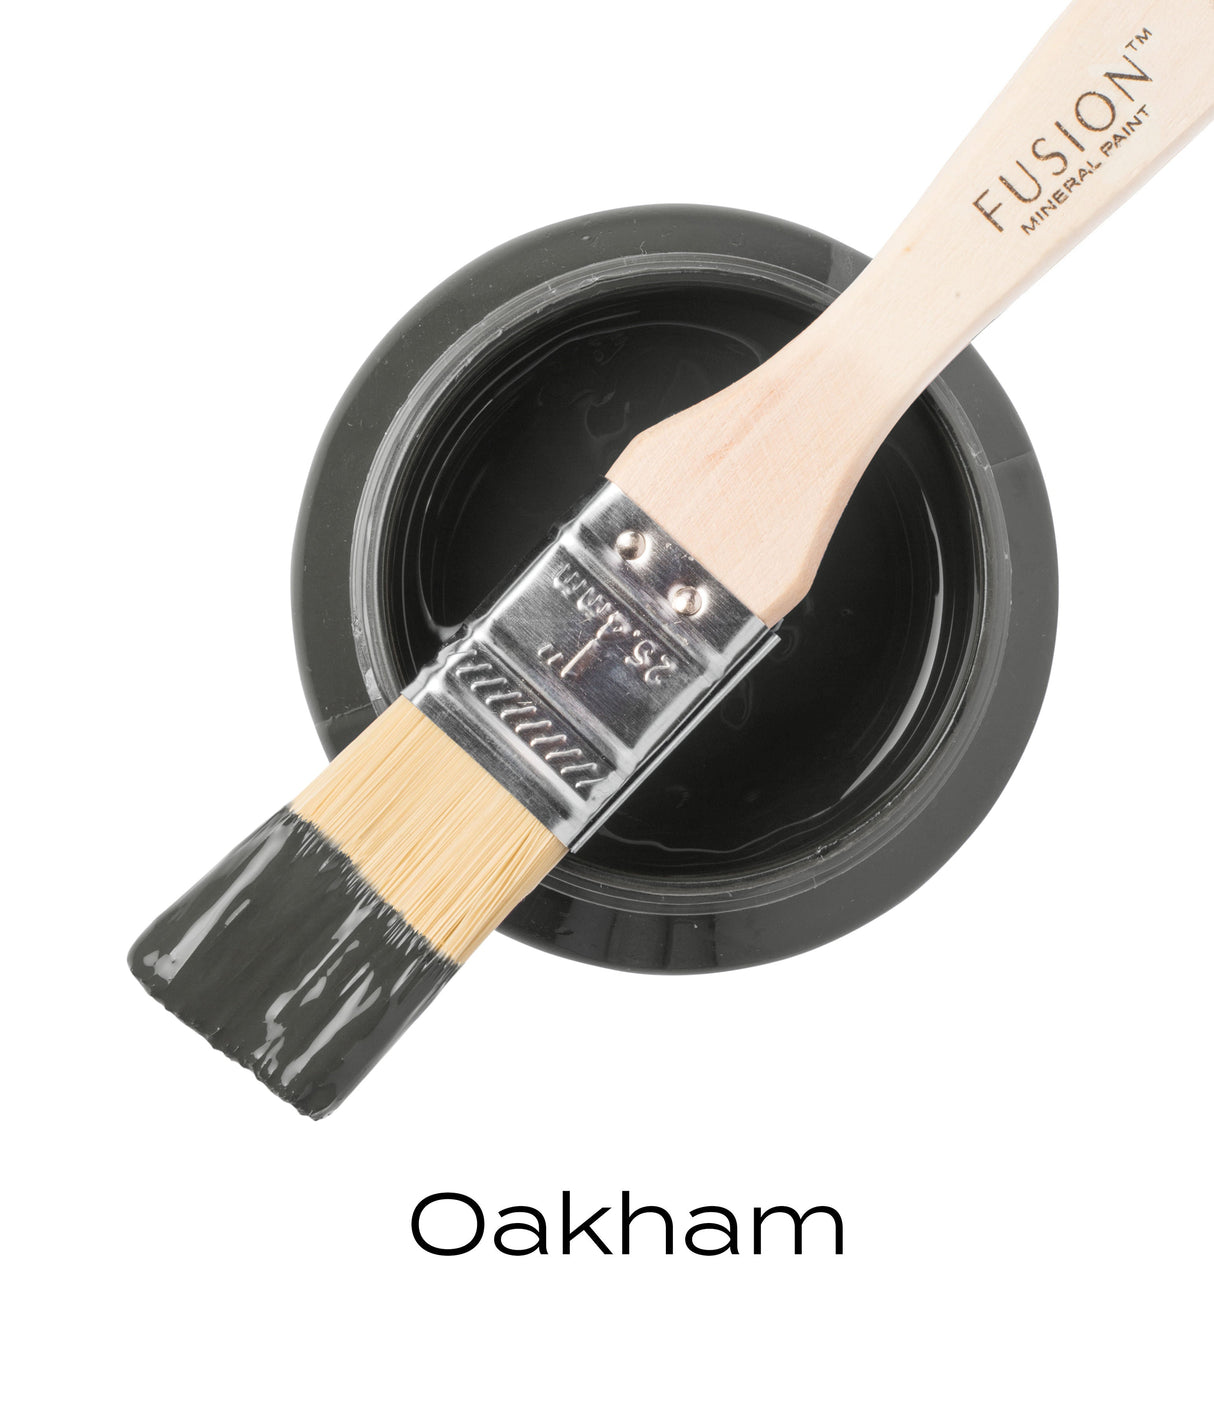 Oakham Fusion Mineral Paint @ The Painted Heirloom